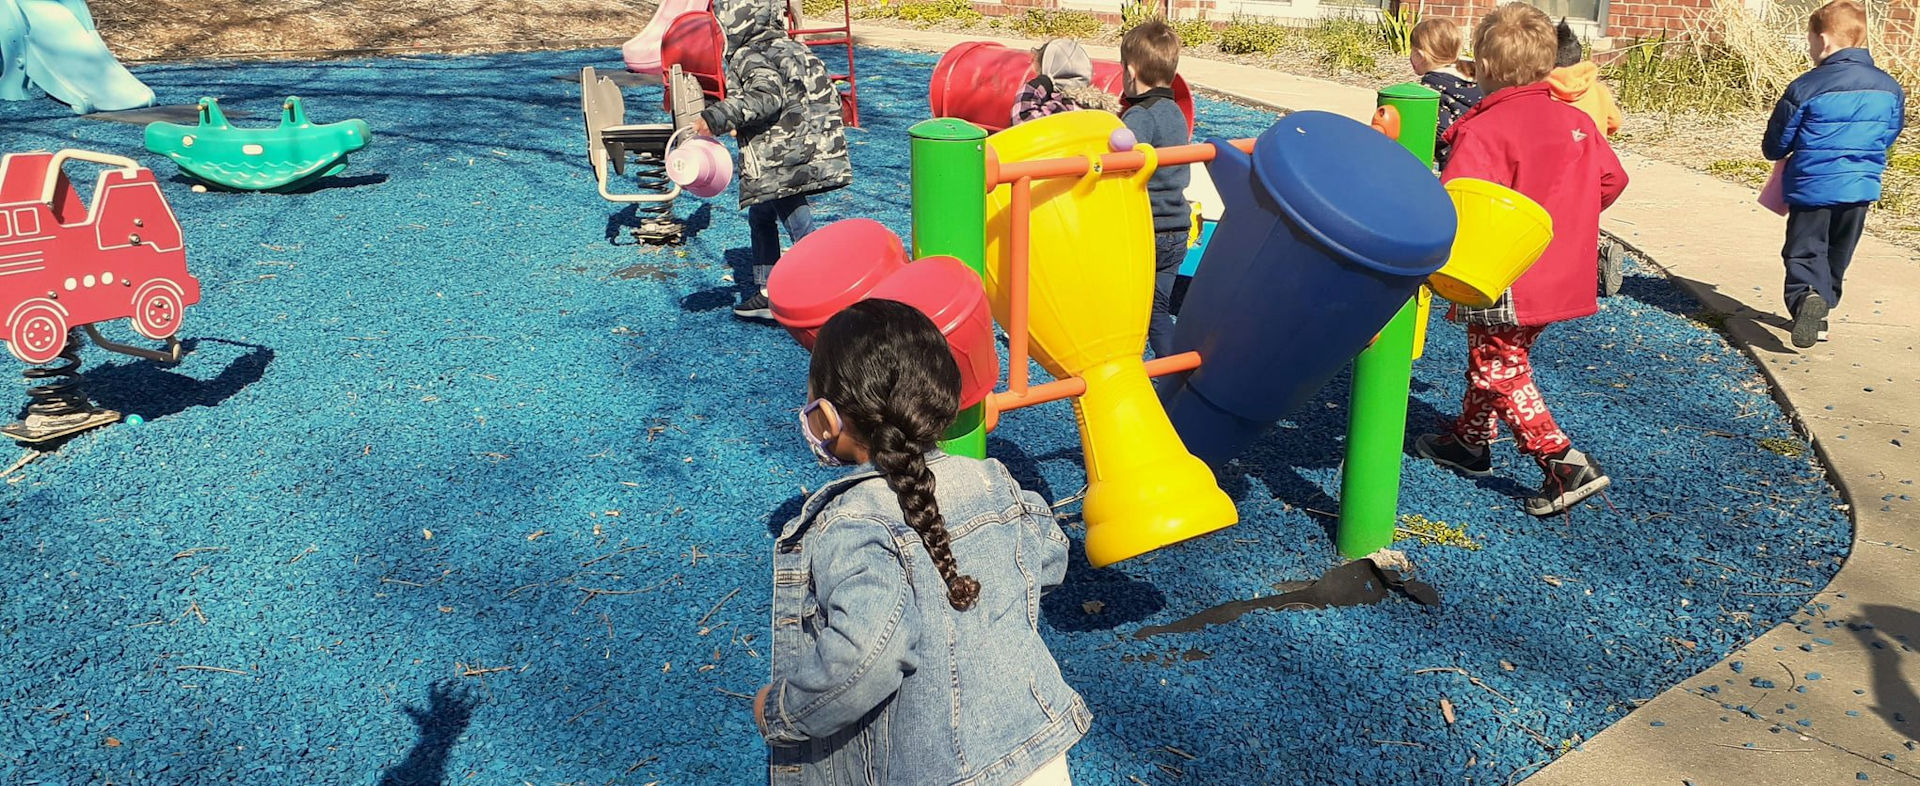 group of young children dressed for cold weather running around on a playground